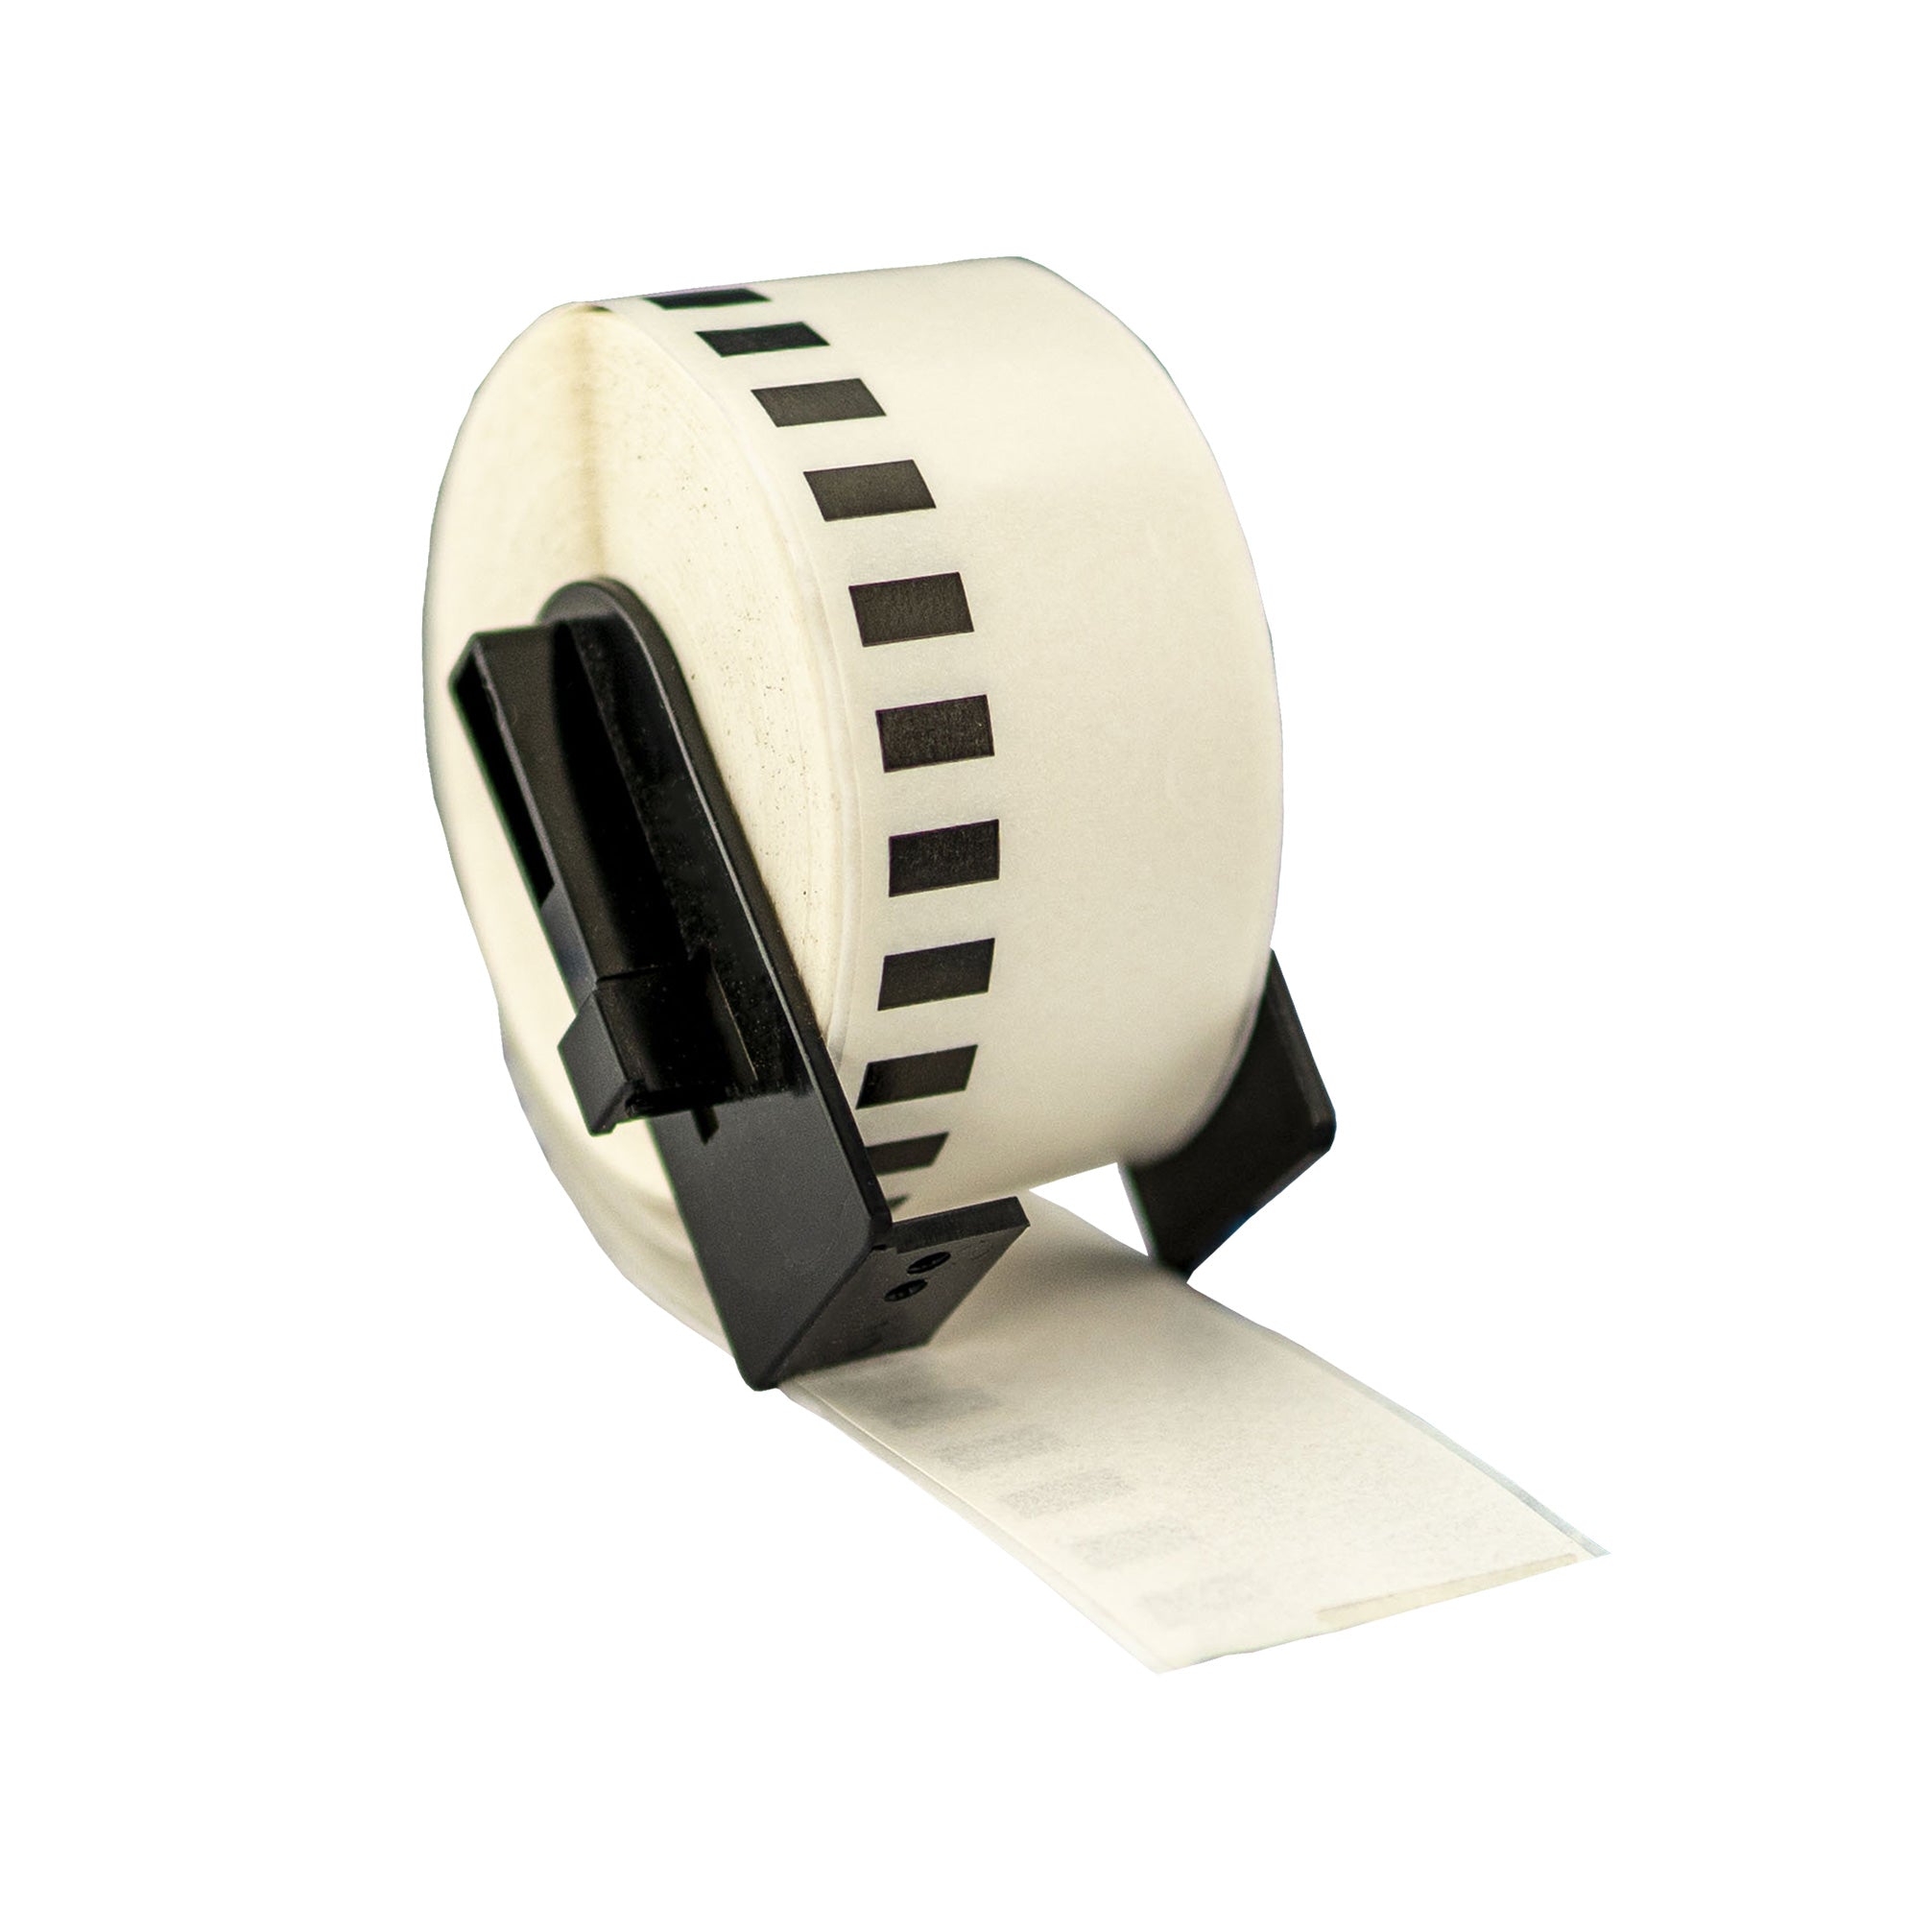 Compatible Brother DK-22223 Label Tapes 50mm x 30.4m/ 50 Rolls